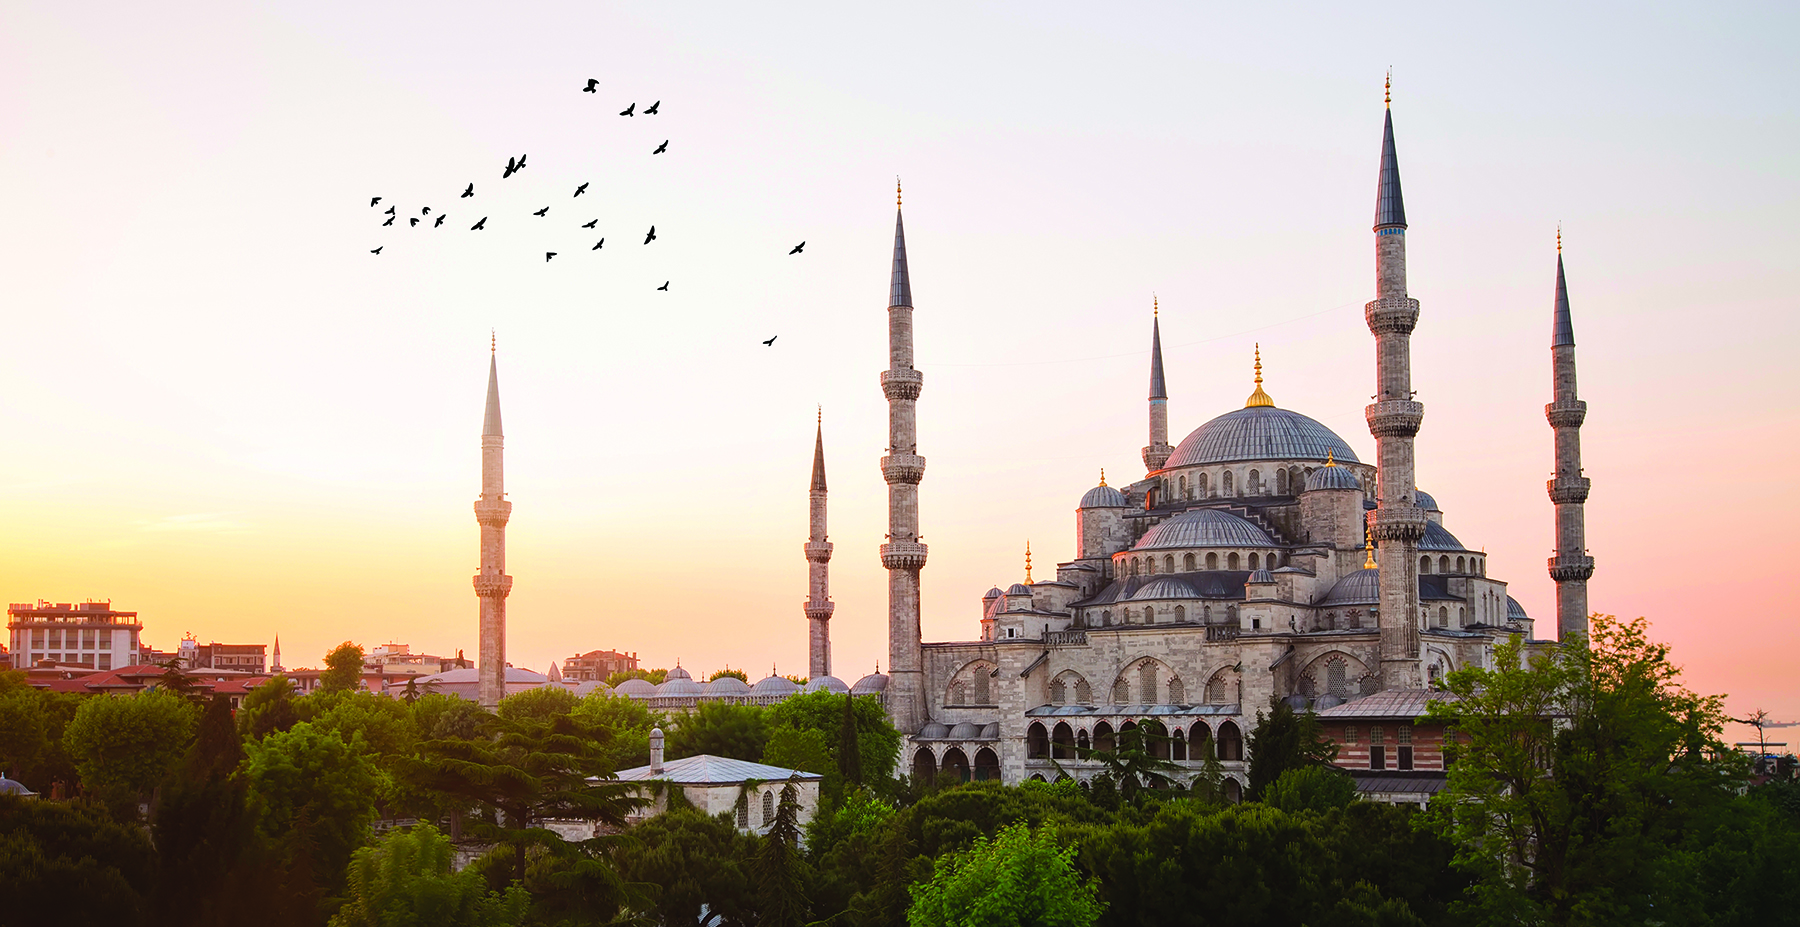 An image of Blue Mosque in Istanbul, Turkey